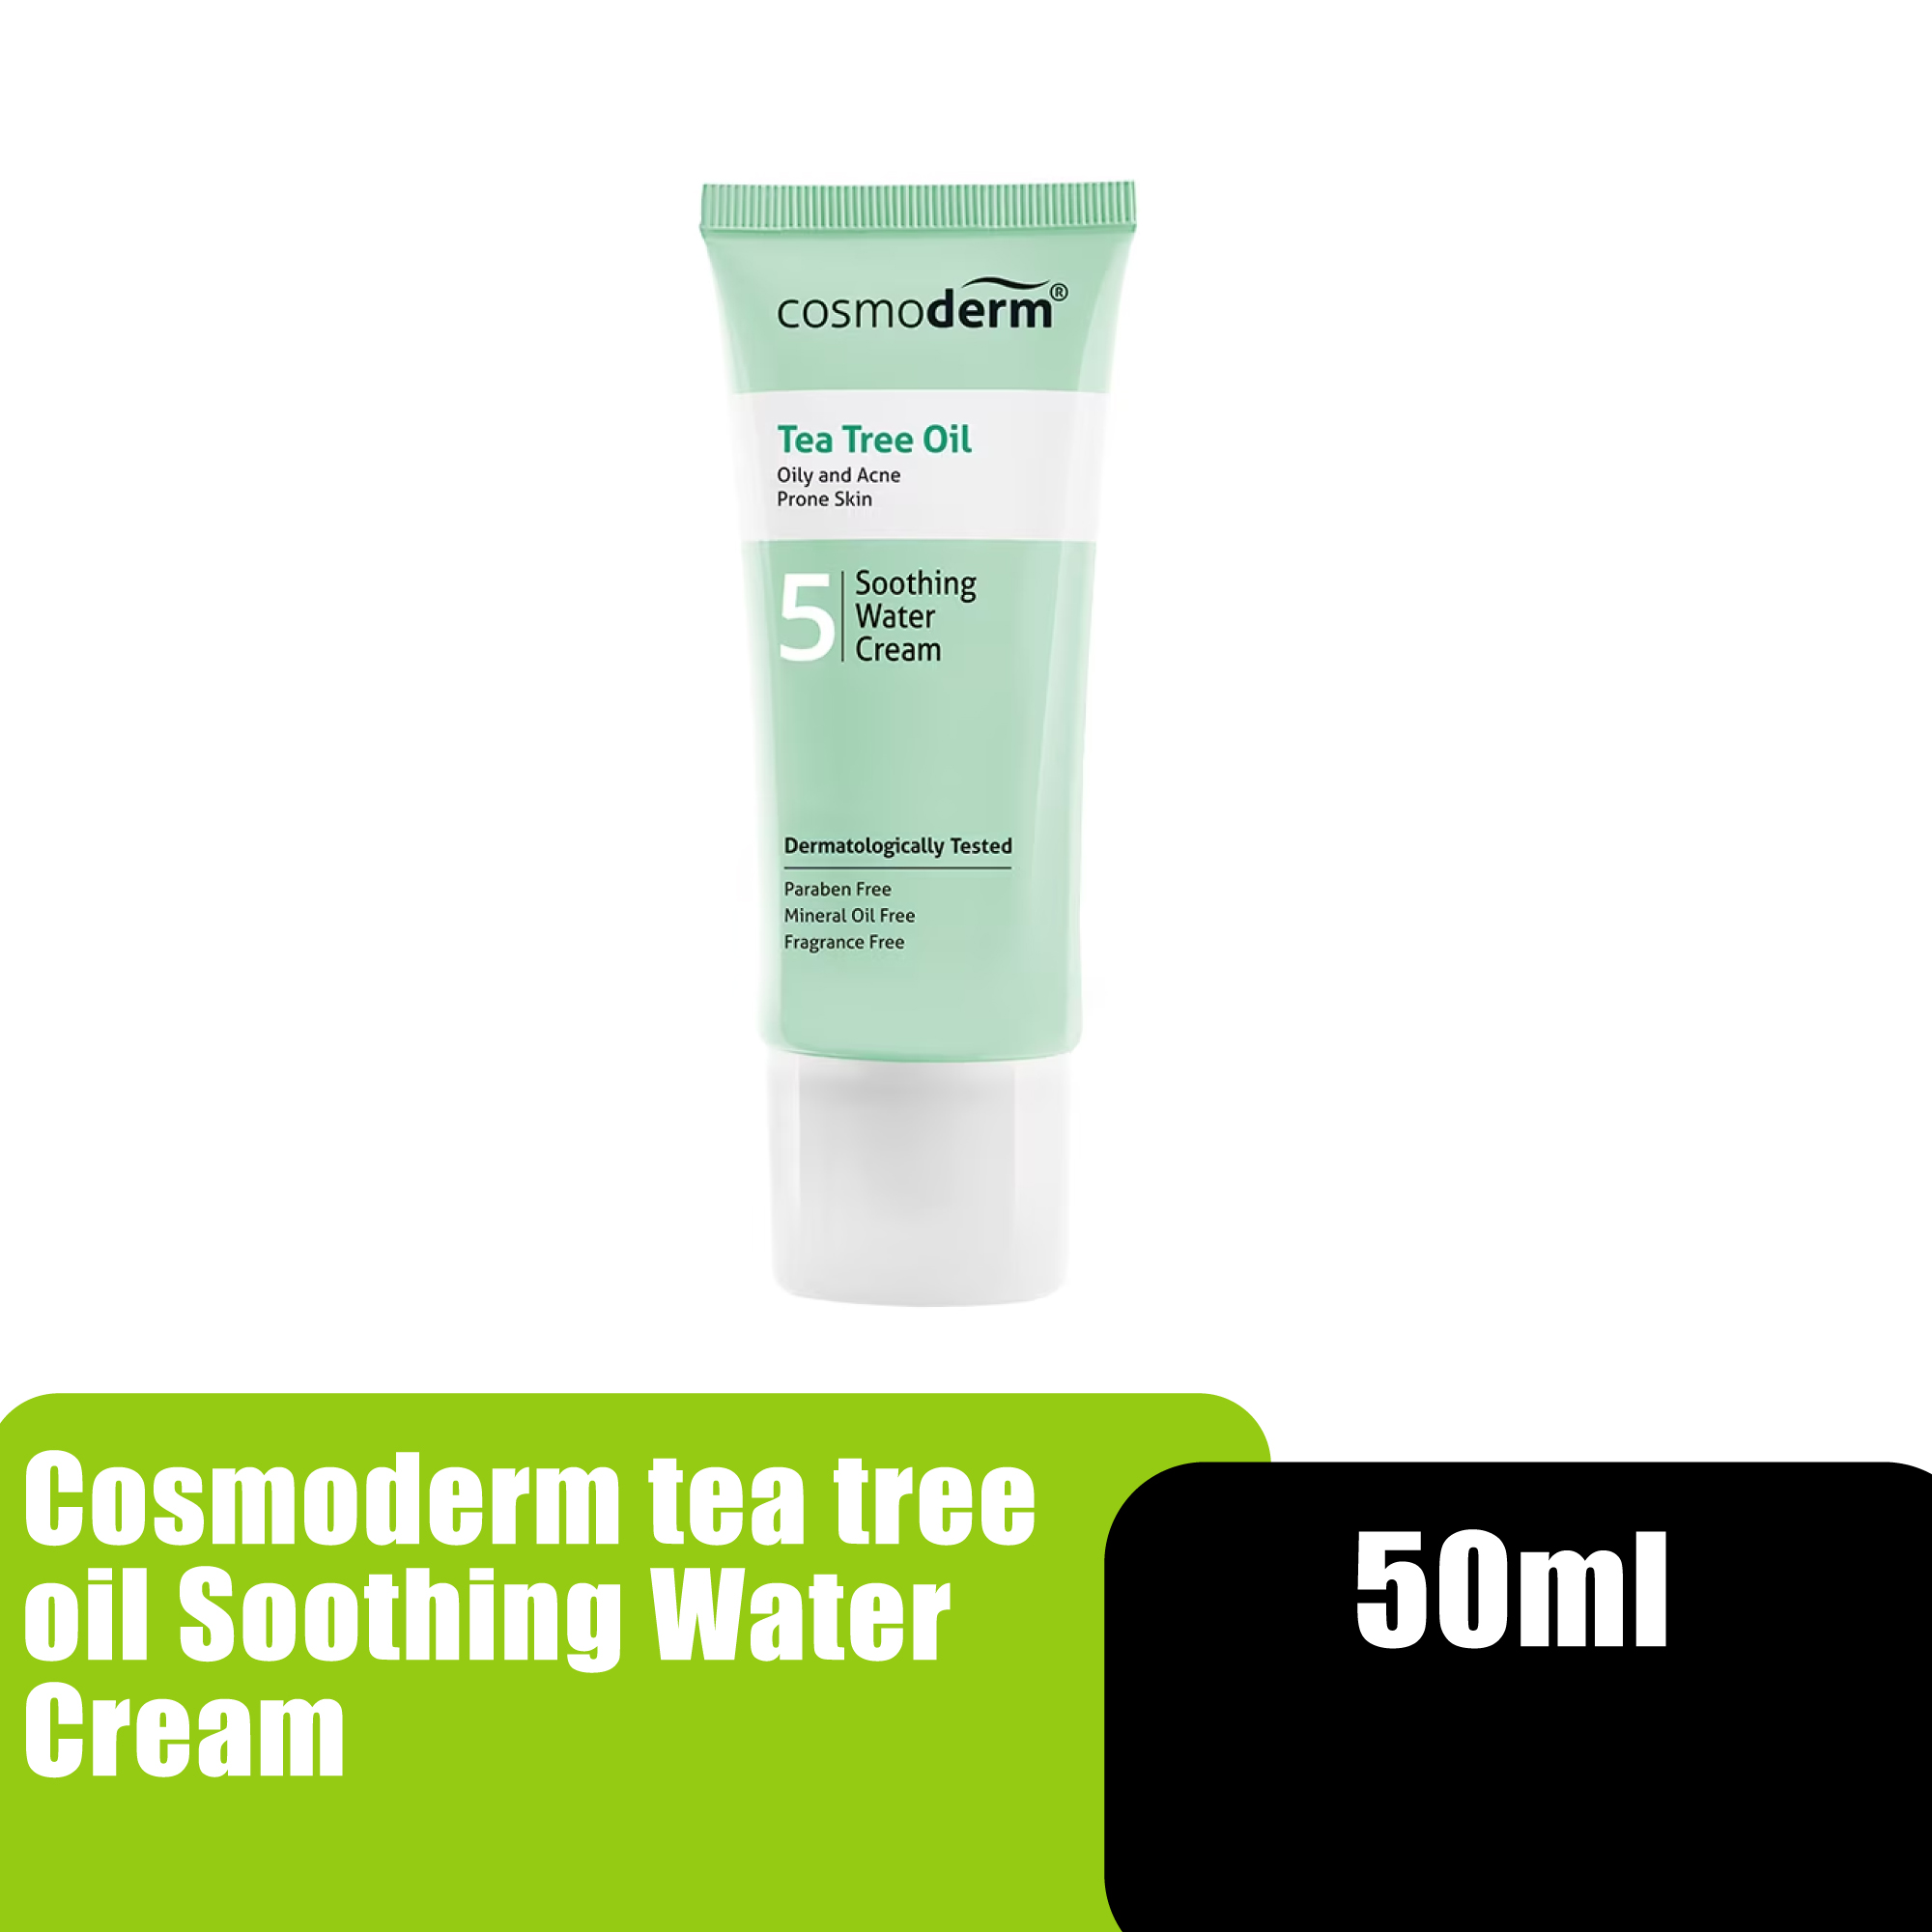 Cosmoderm Tea Tree Oil Soothing Water Cream Acne, Blackhead Remover, Whitehead Remove 50ml